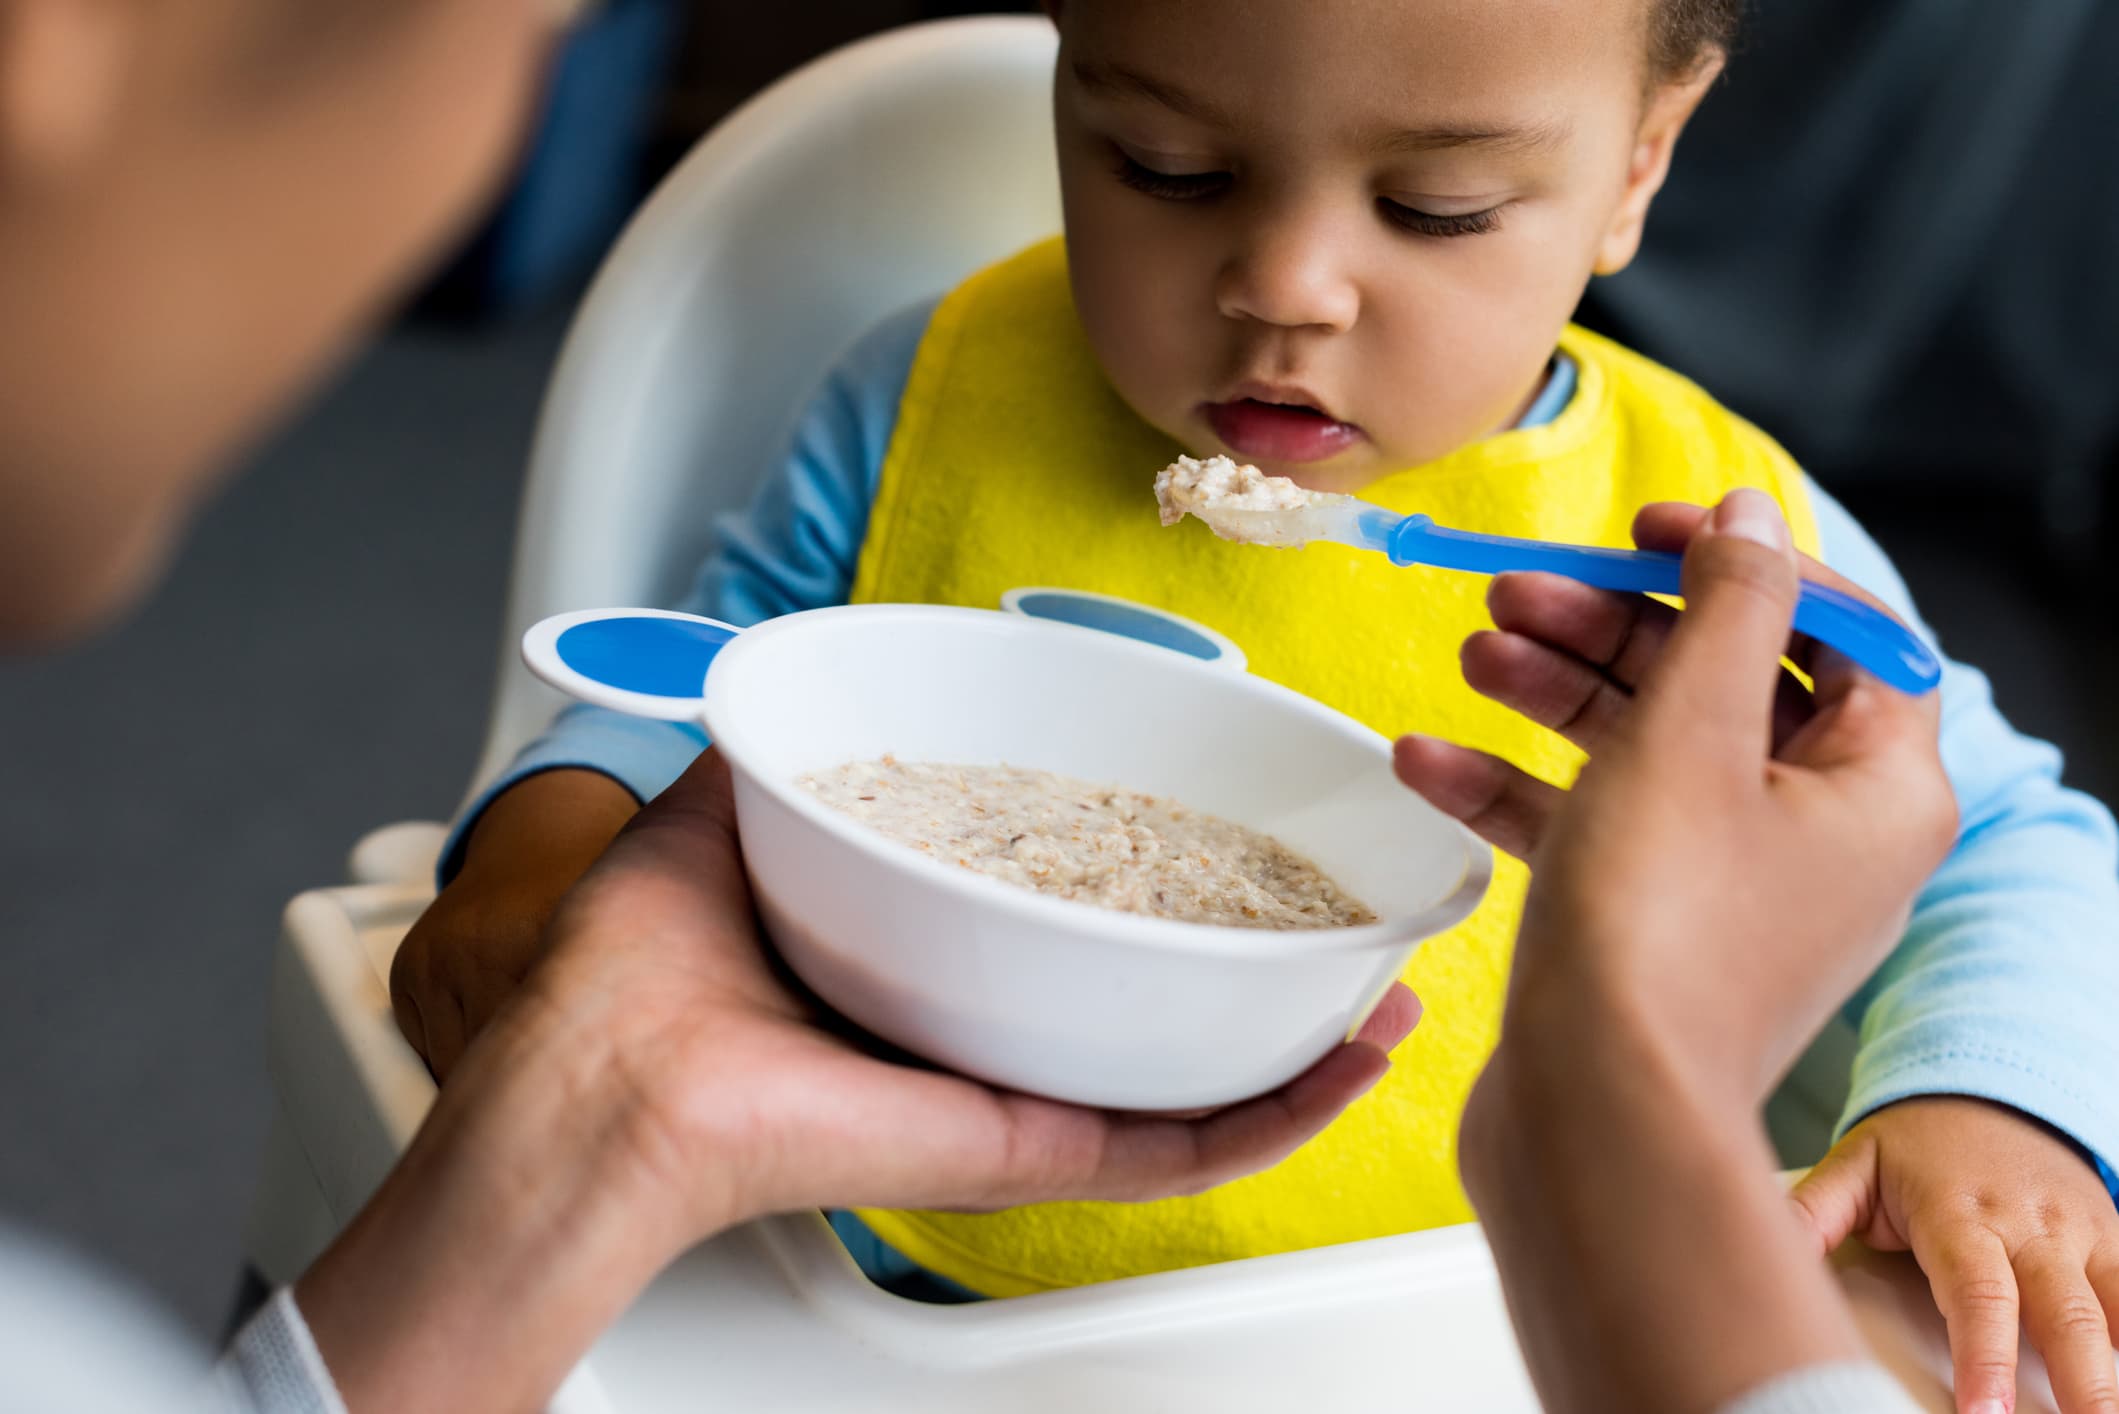 Rice Cereal: Why It’s Not The Safest Choice For Your Baby